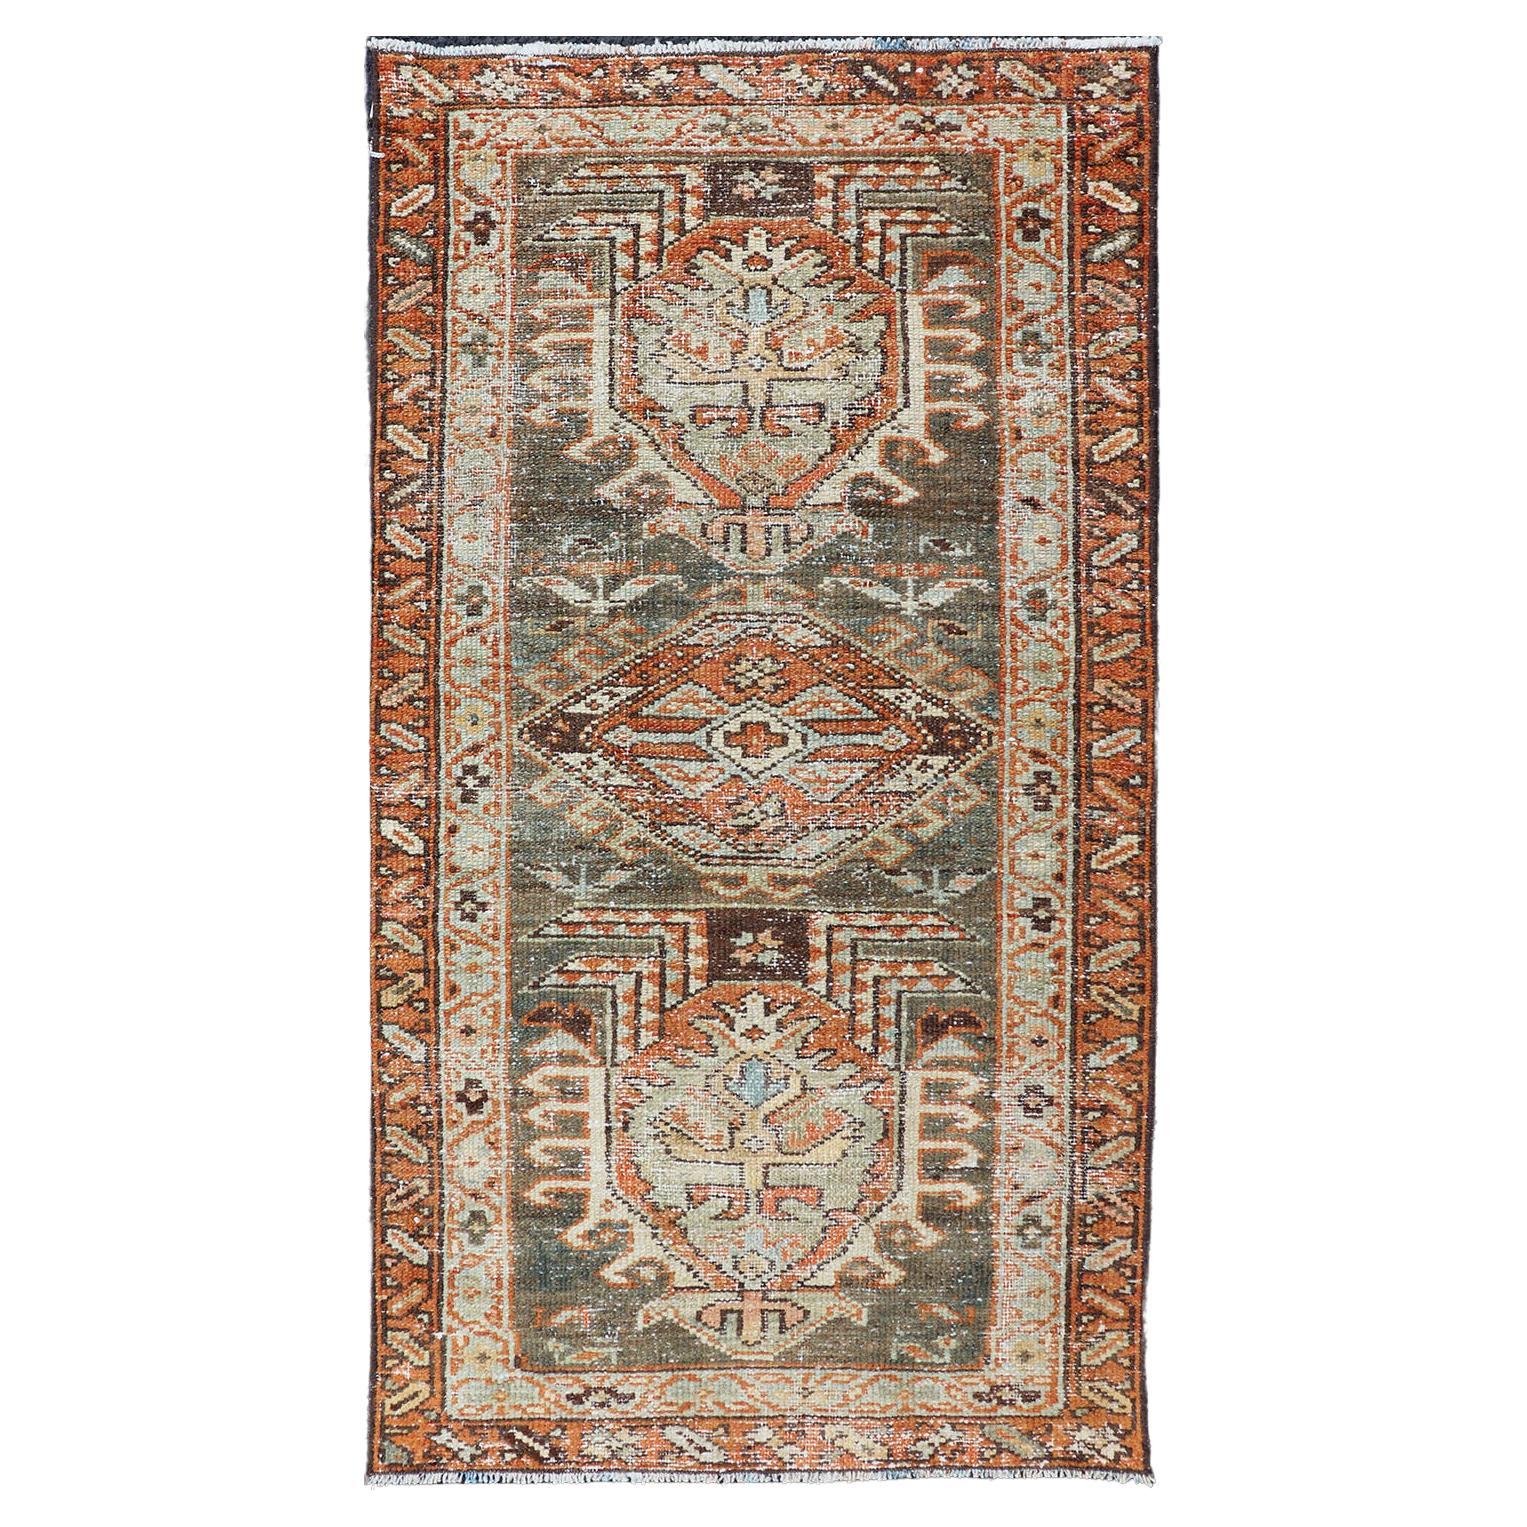 Small Antique Persian Karadjeh Rug with All-Over Sub-Geometric Medallion Design